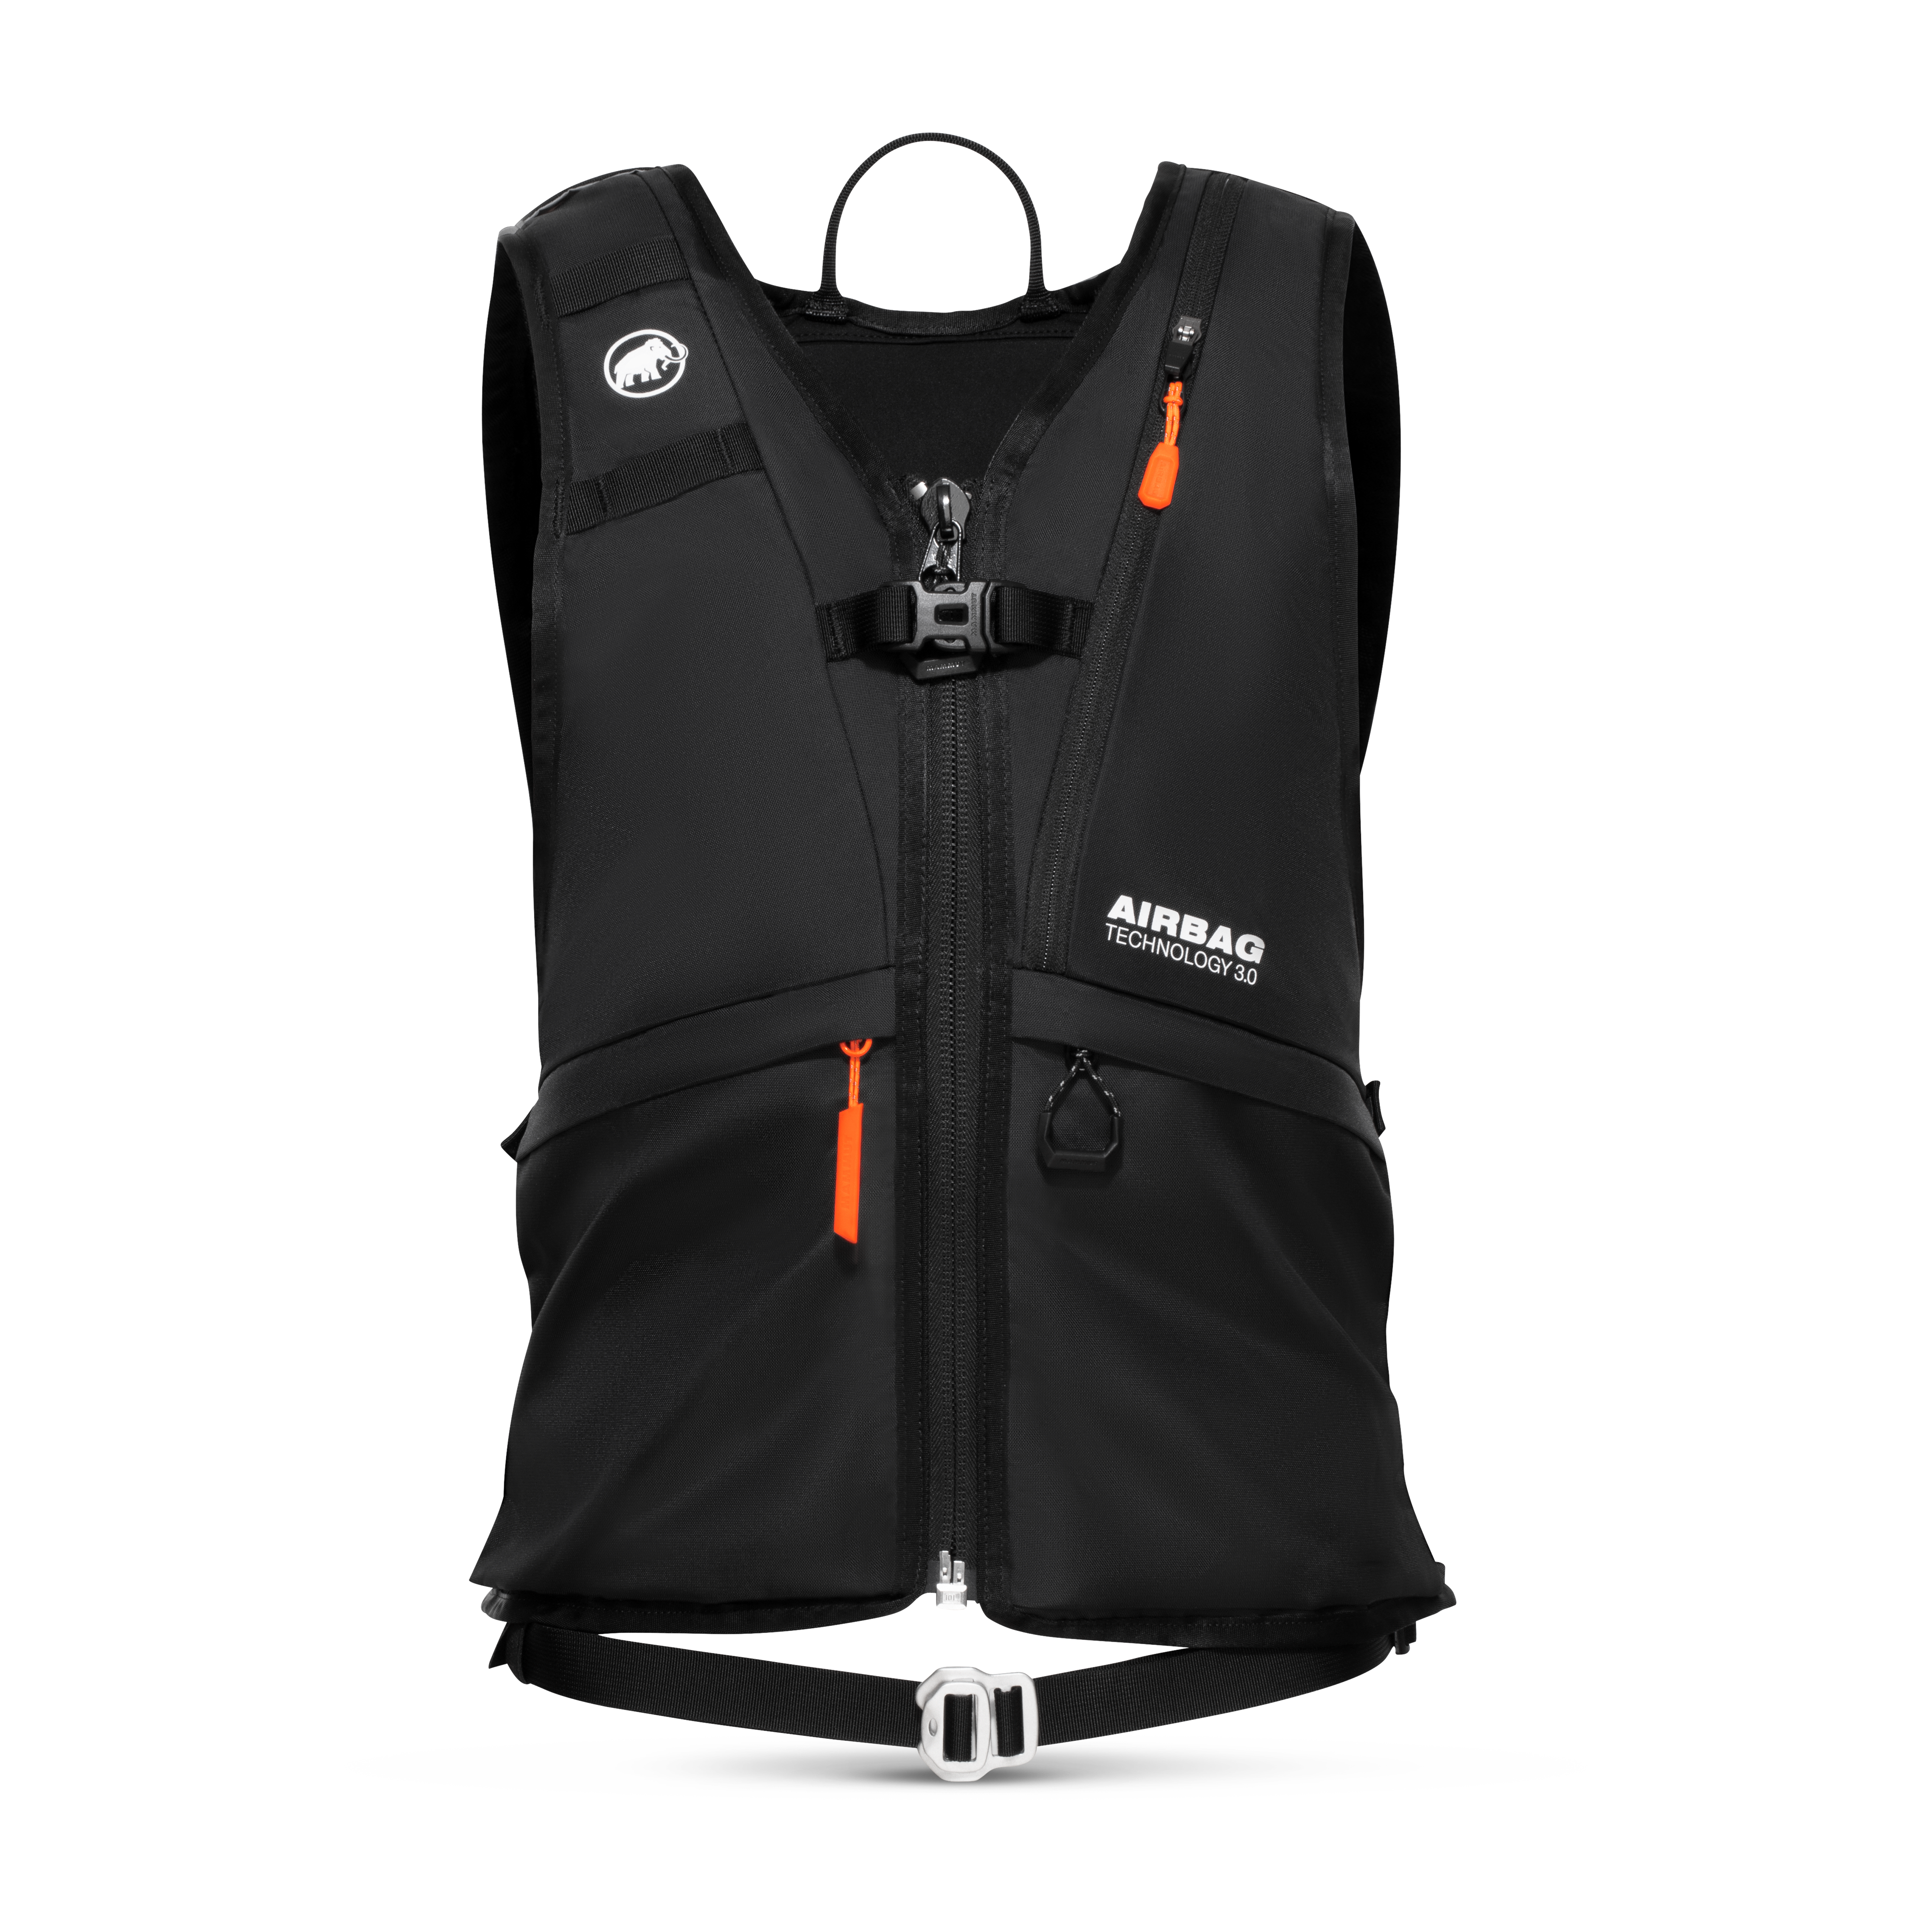 Free Vest 15 Removable Airbag 3.0 (XS-M) ready thumbnail